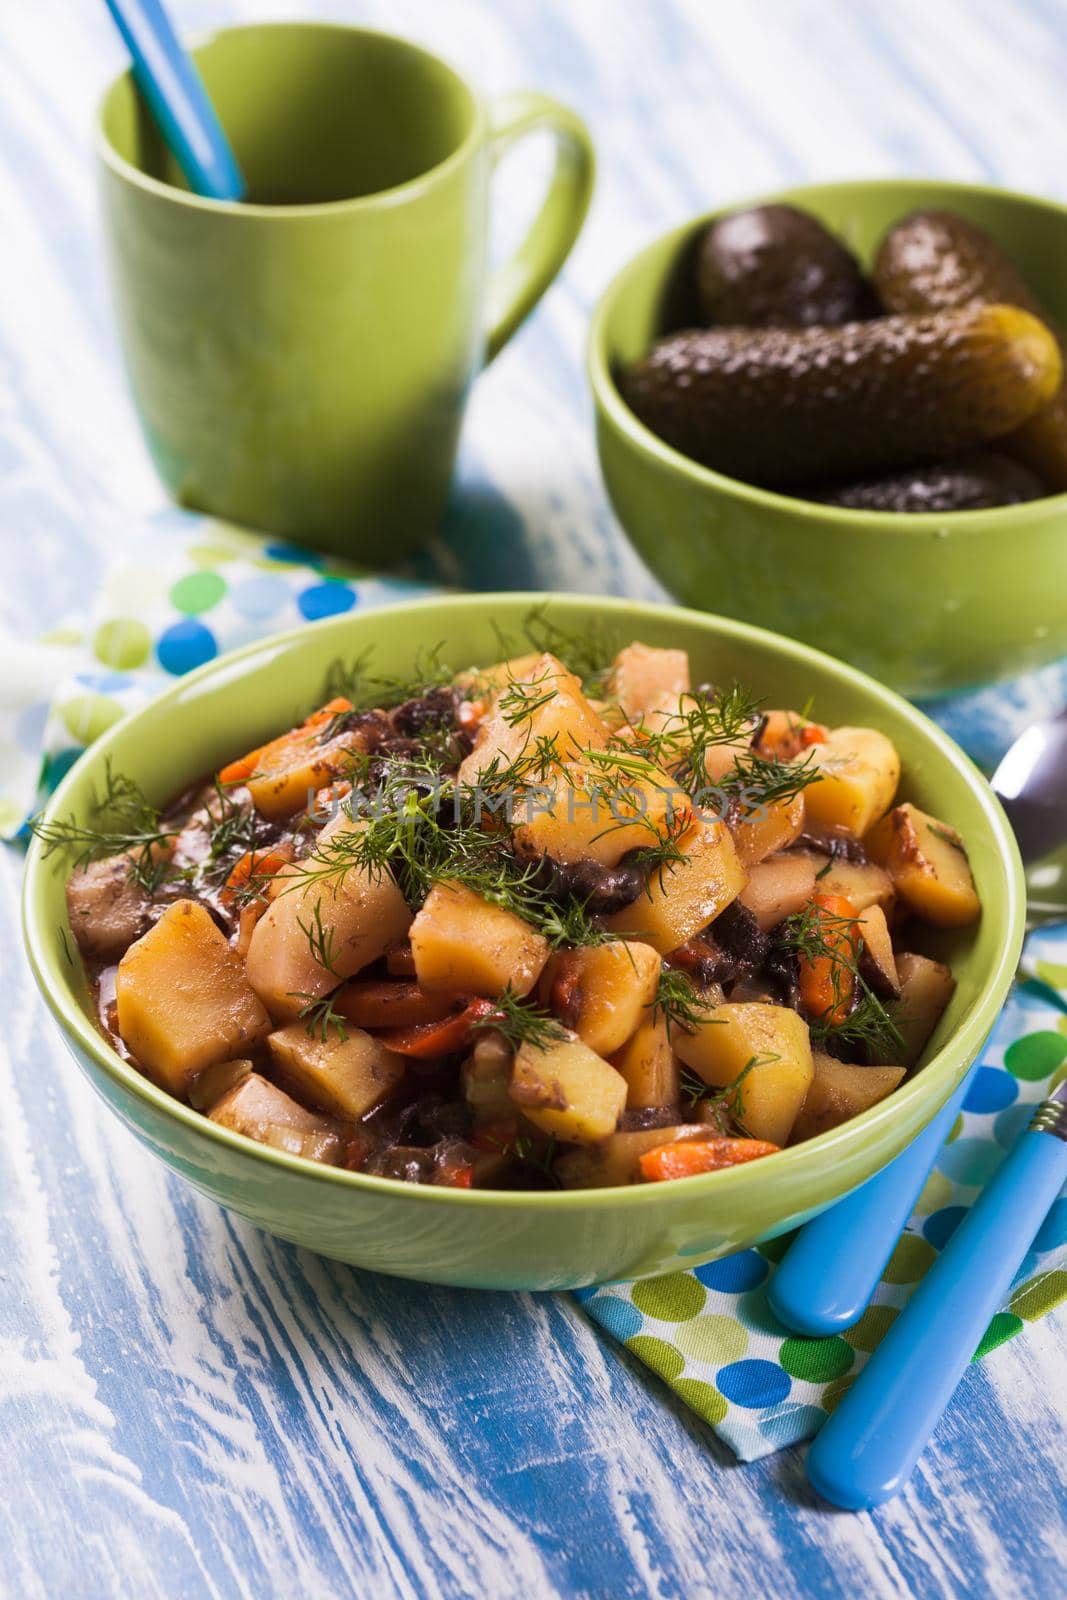 Vegetable ragout with mushrooms in a bowl